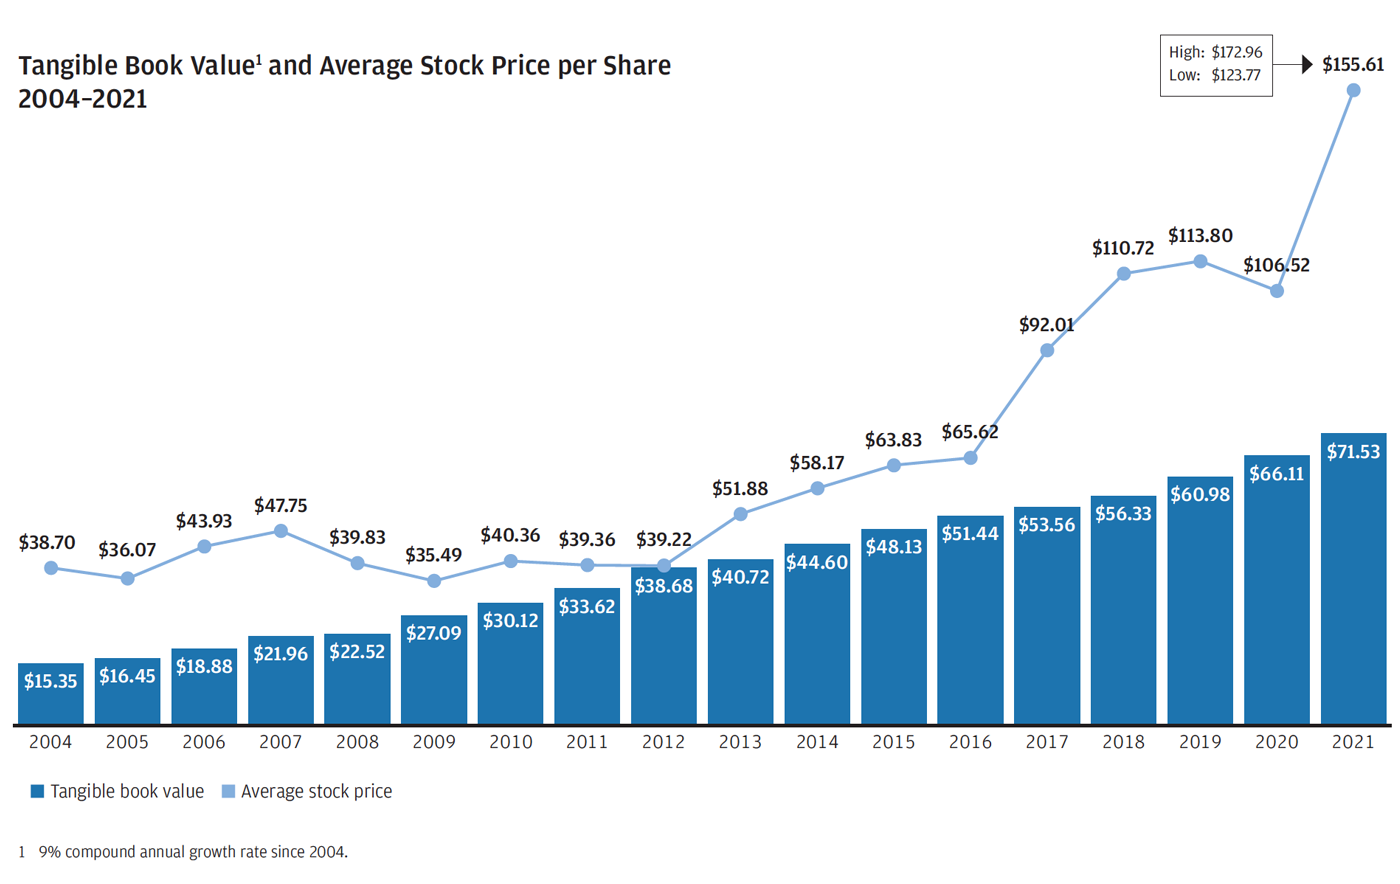 Bar graph showing 2004 to 2021 trend of tangible book value per share, with overlayed line for average stock price